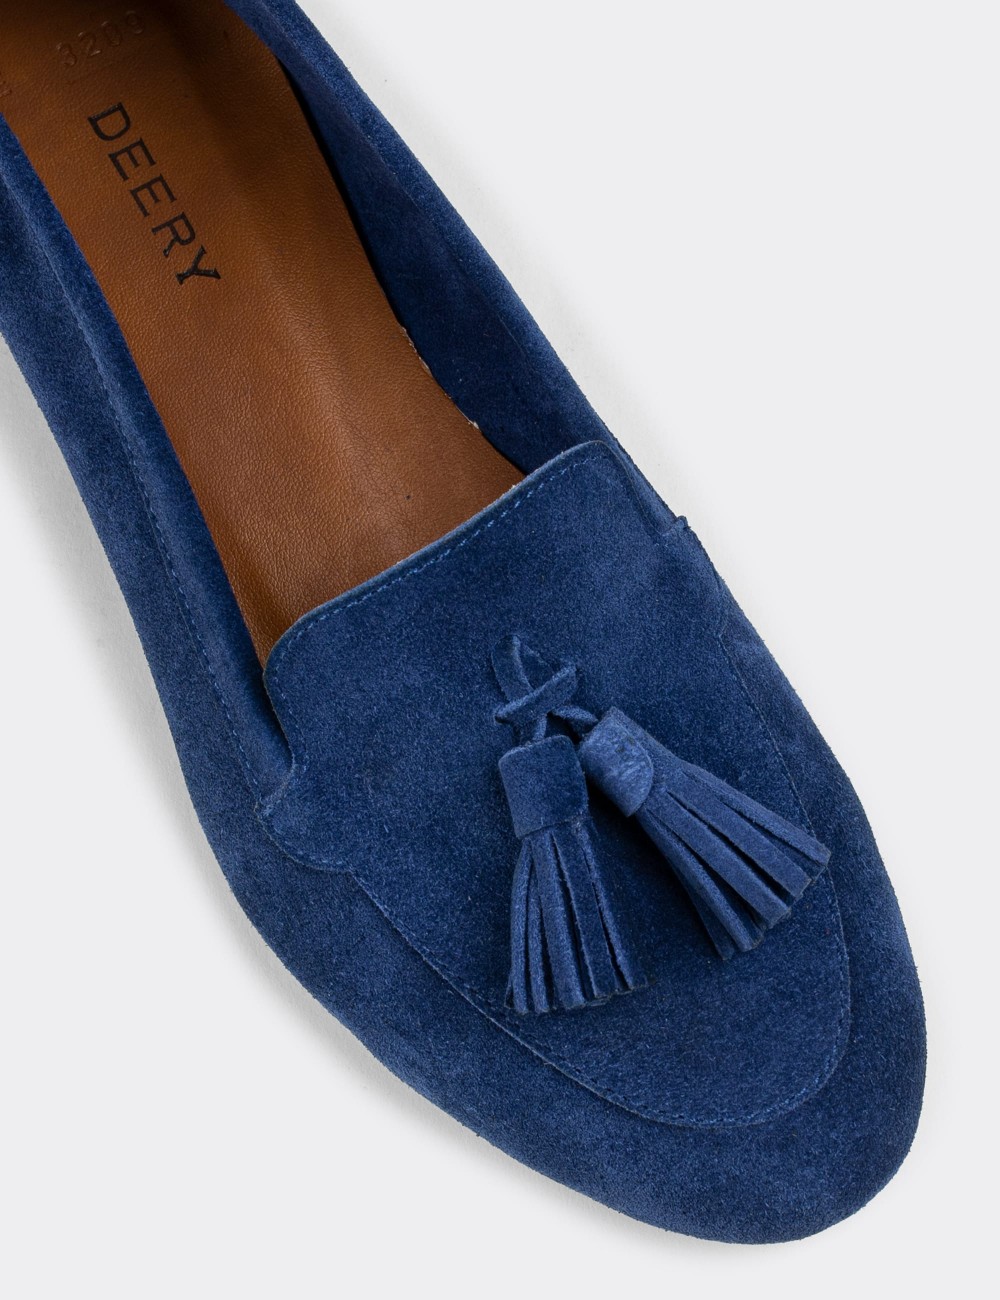 Blue Suede Leather Loafers - E3209ZMVIC04